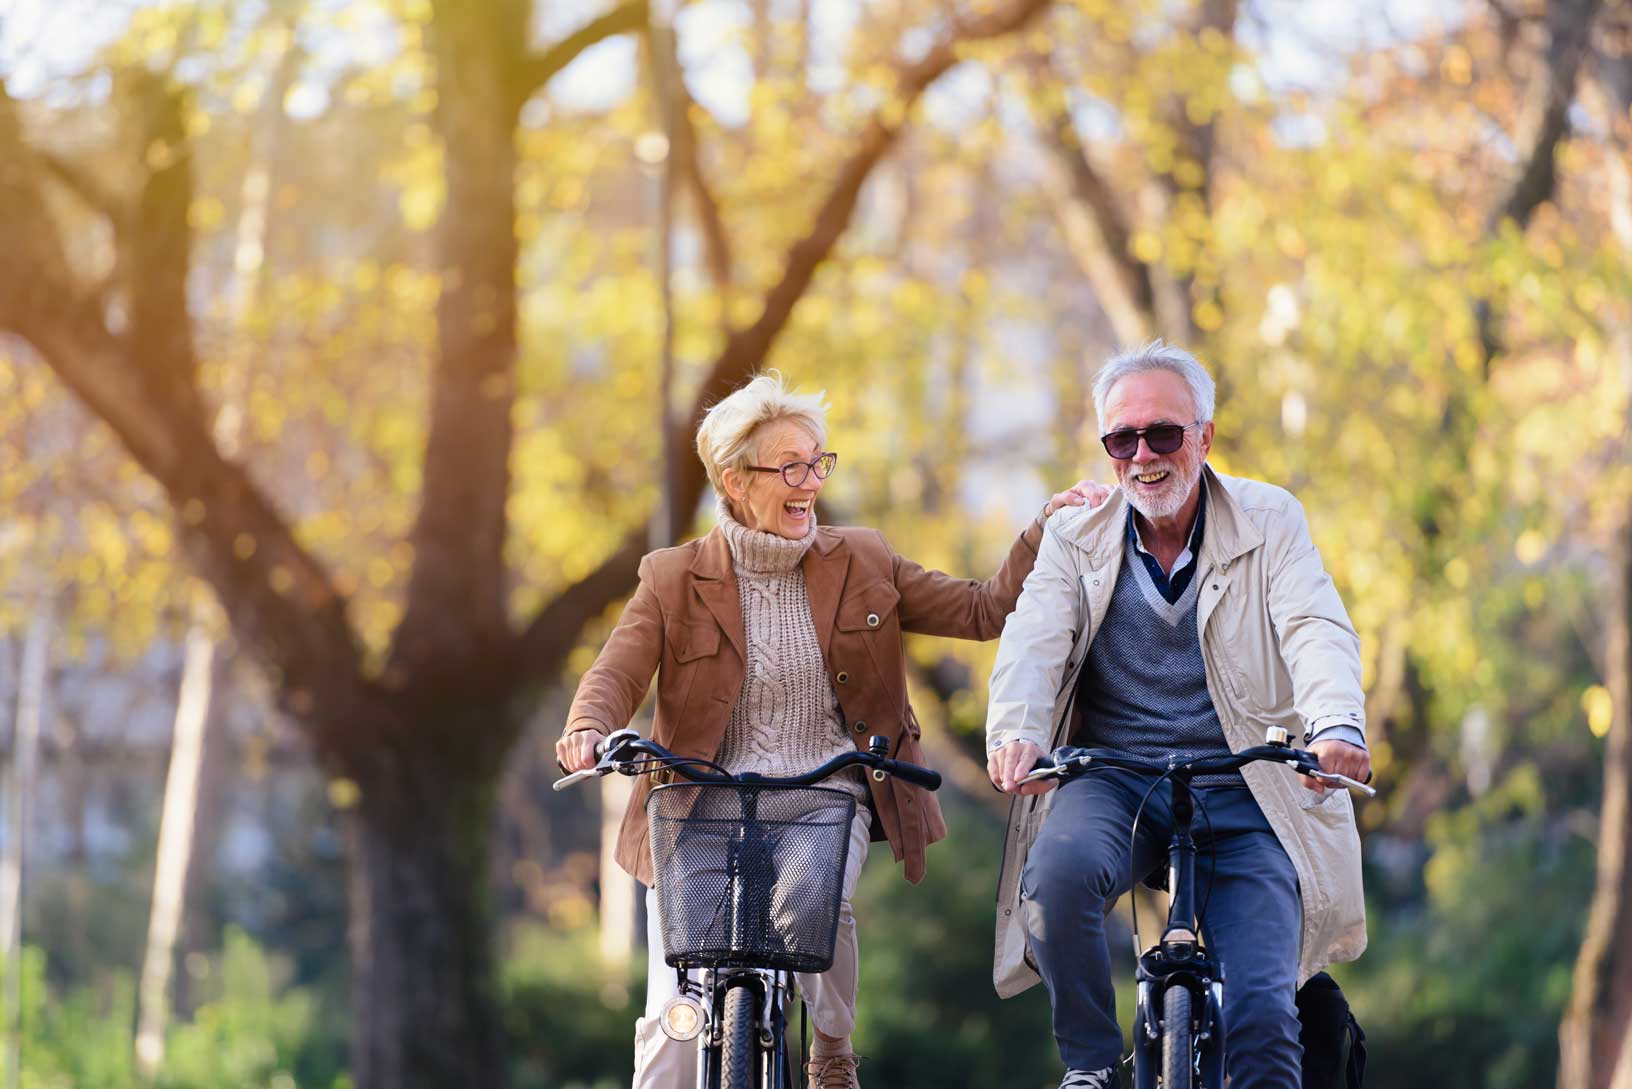 An elderly couple enjoying a bike ride together in a serene park setting. Nearby their apartment at the The Dials.